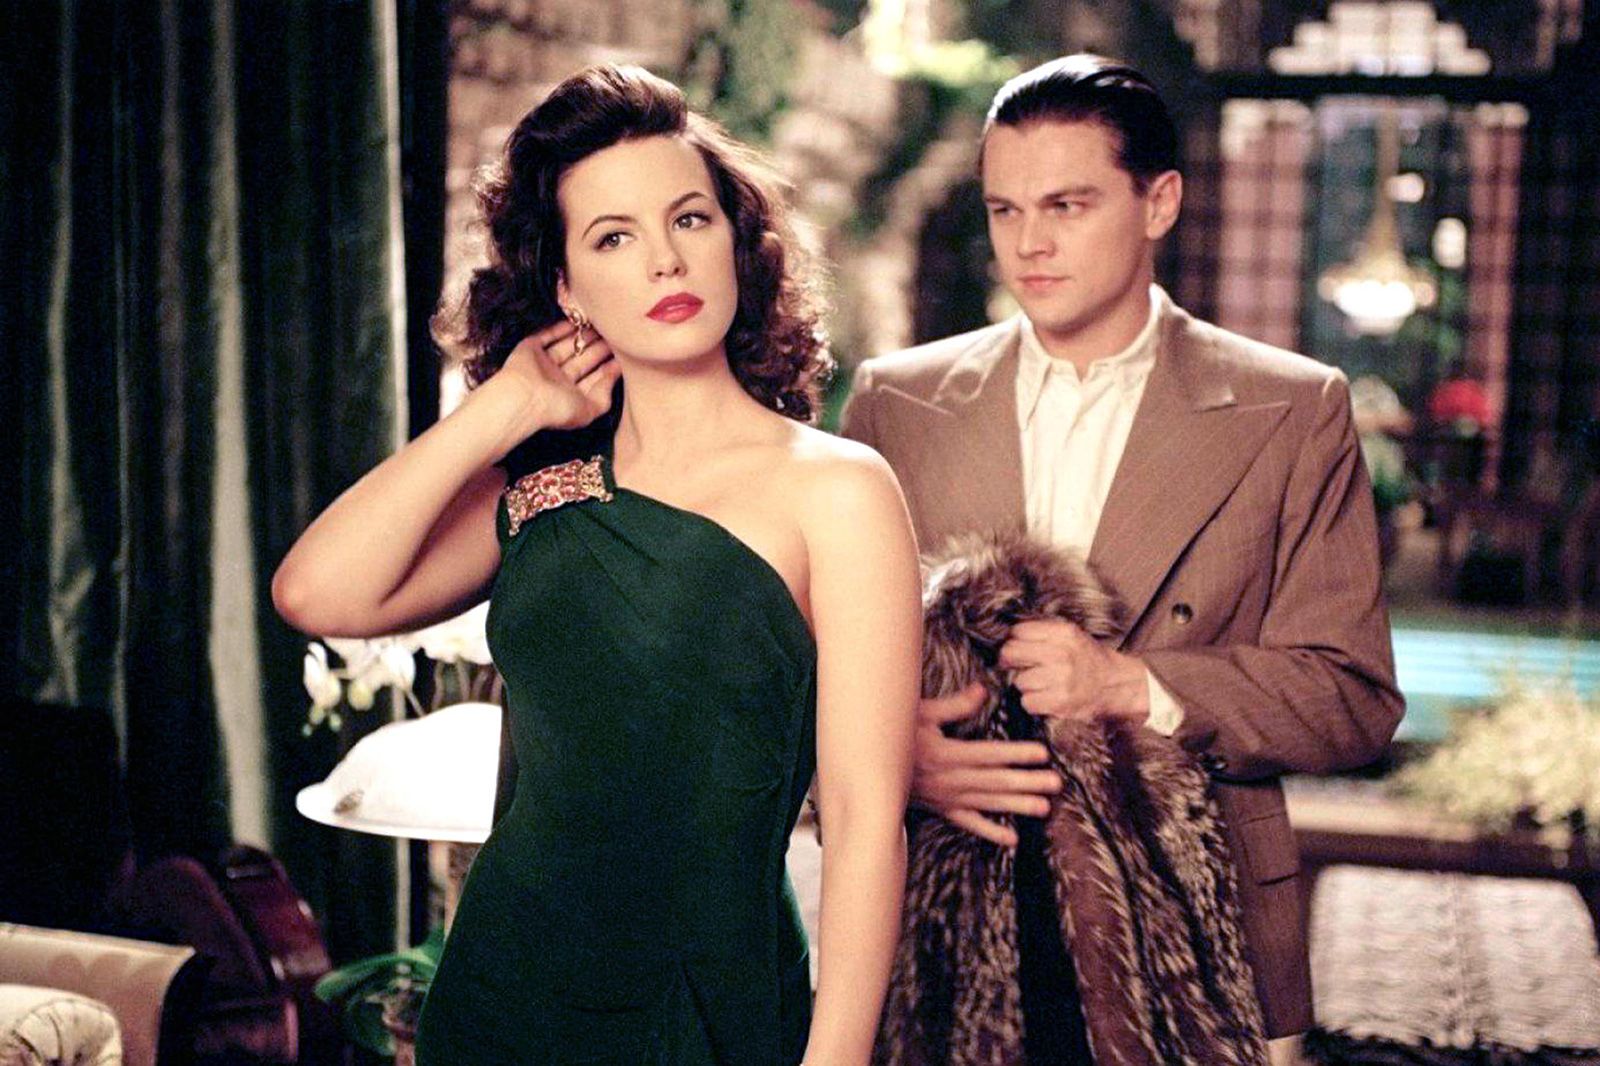 Beckinsale starred alongside DiCaprio in “The Aviator“ as actress Ava Gardner and aerospace engineer Howard Hughes.